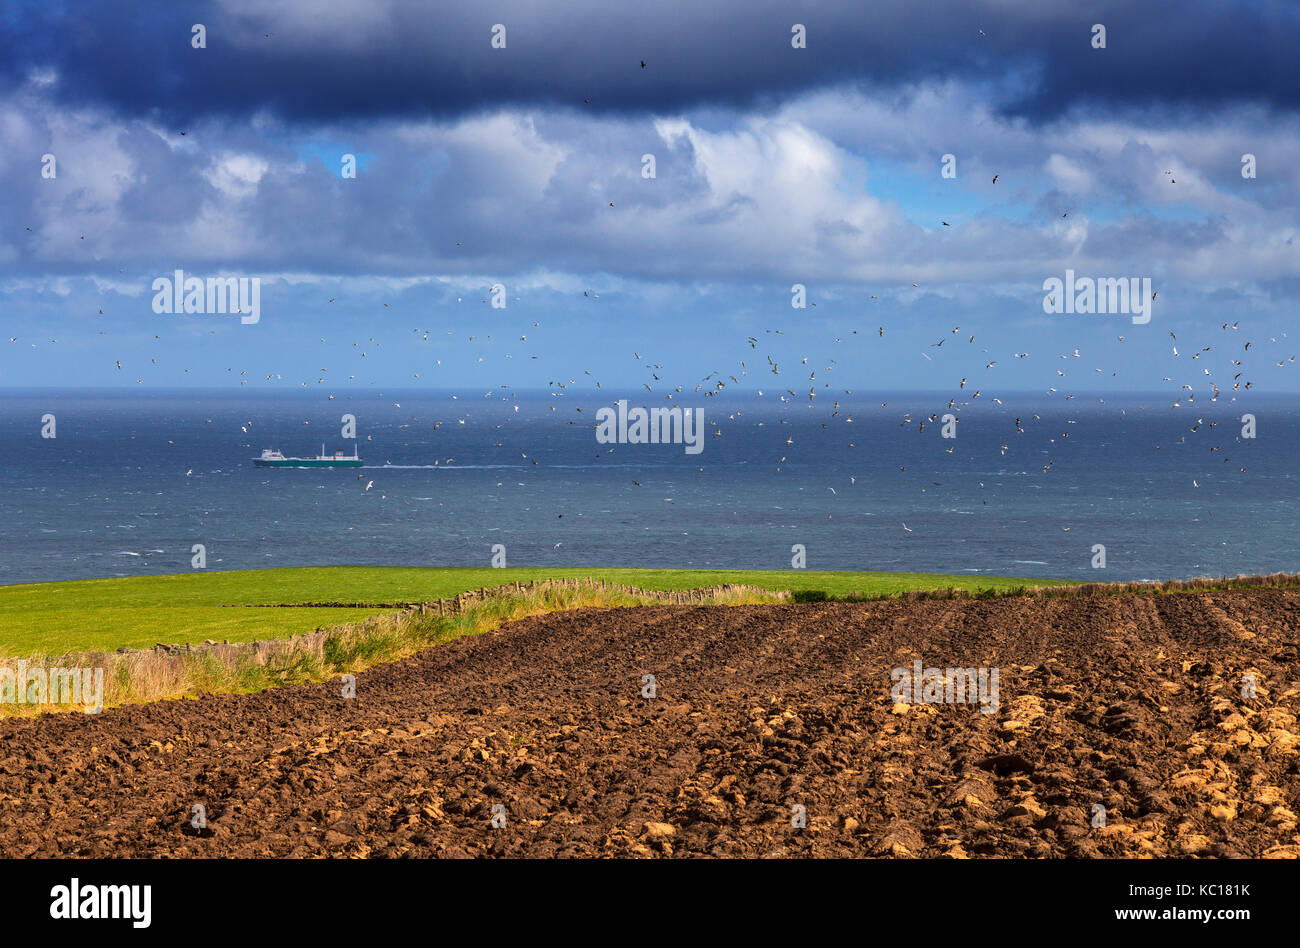 Newly tilled field with a flock of seagulls, on the North Yorkshire and Cleveland Heritage Coast, behind is the North Sea with a passing ship. England Stock Photo